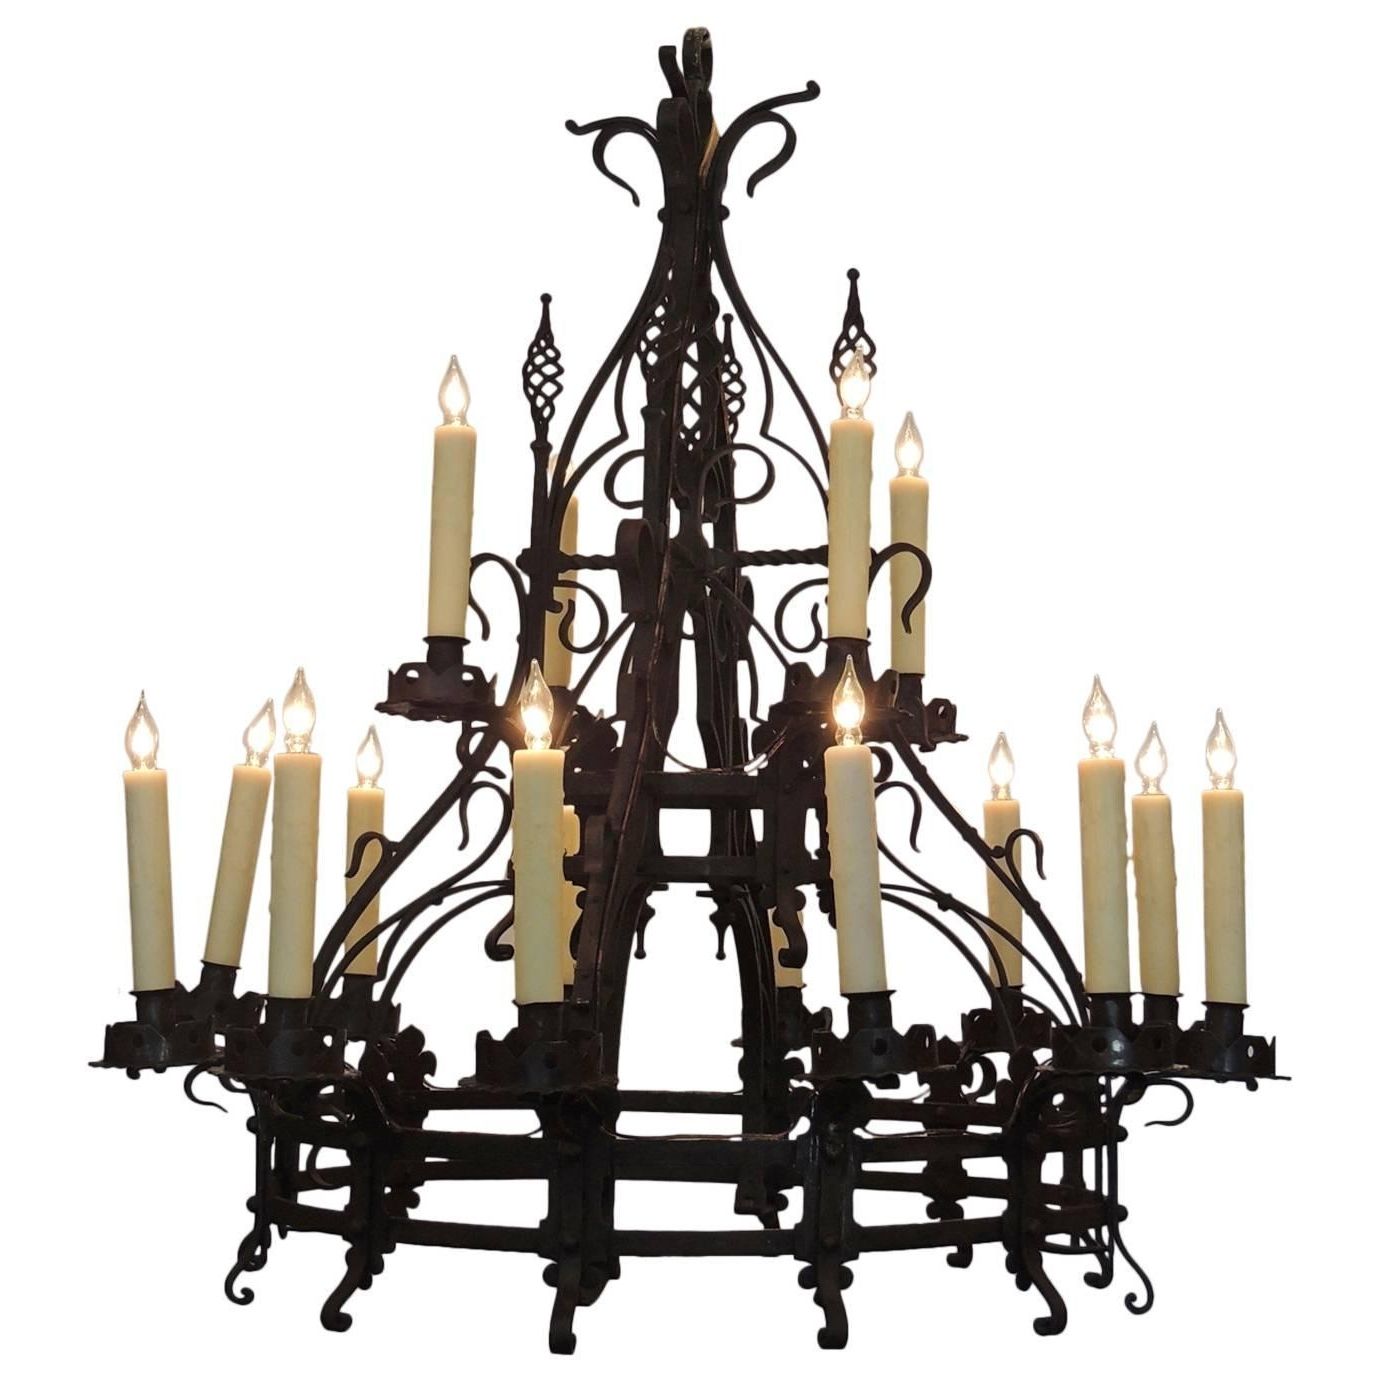 Wrought Iron Chandelier Throughout Well Liked Late 19th C French Gothic Wrought Iron Chandelier For Sale At 1stdibs (View 8 of 20)